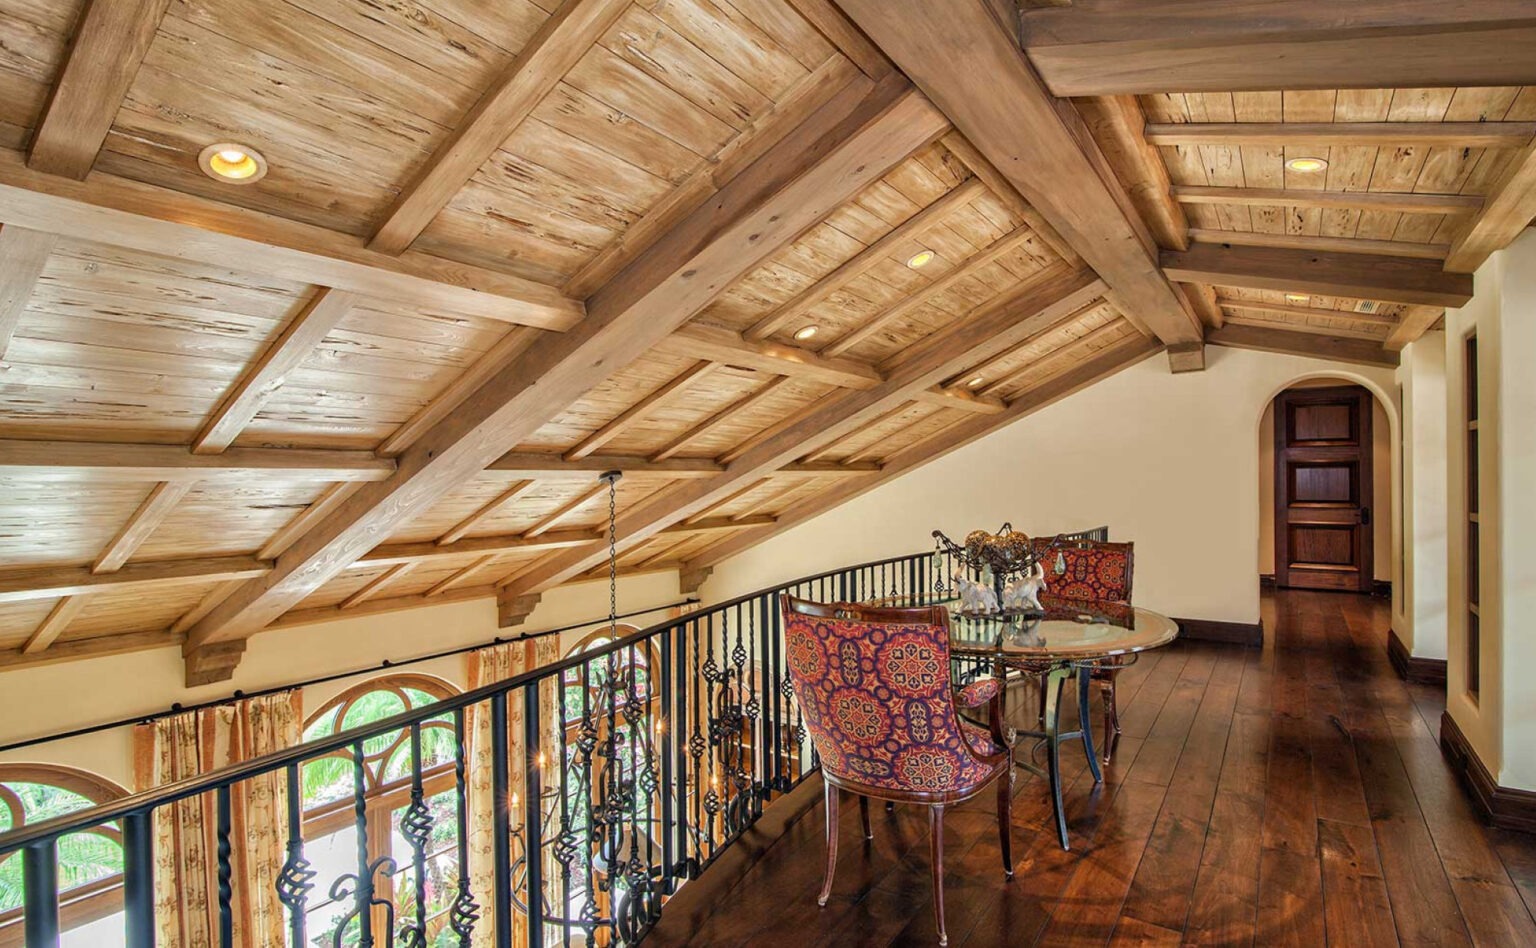 vaulted ceilings made from exotic wood